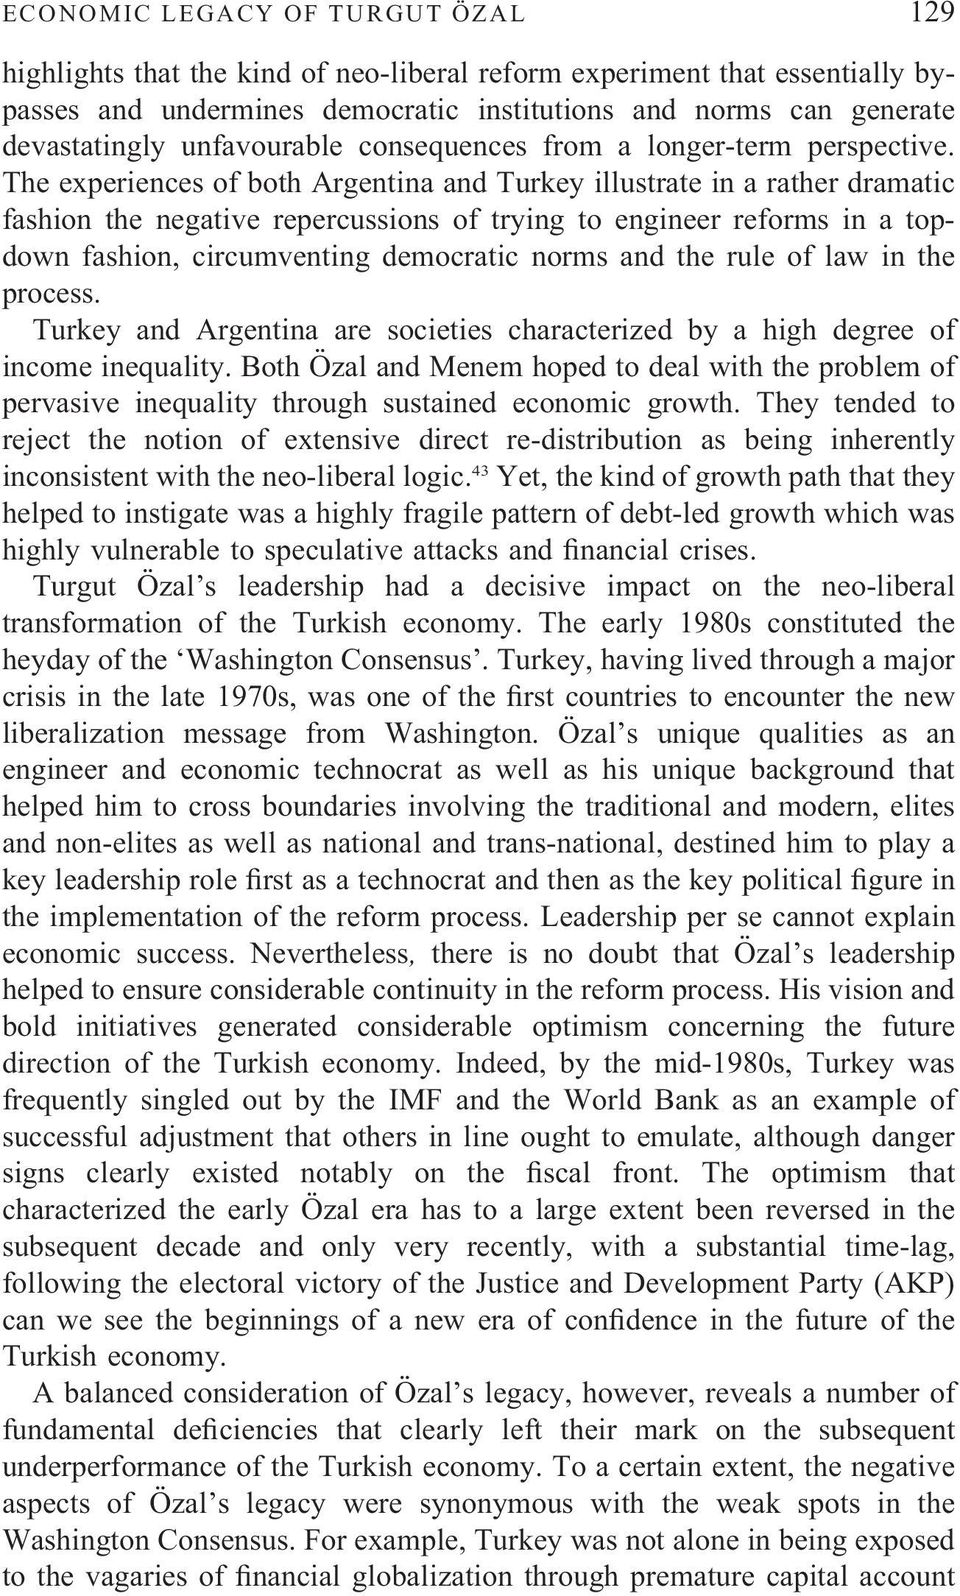 The experiences of both Argentina and Turkey illustrate in a rather dramatic fashion the negative repercussions of trying to engineer reforms in a topdown fashion, circumventing democratic norms and